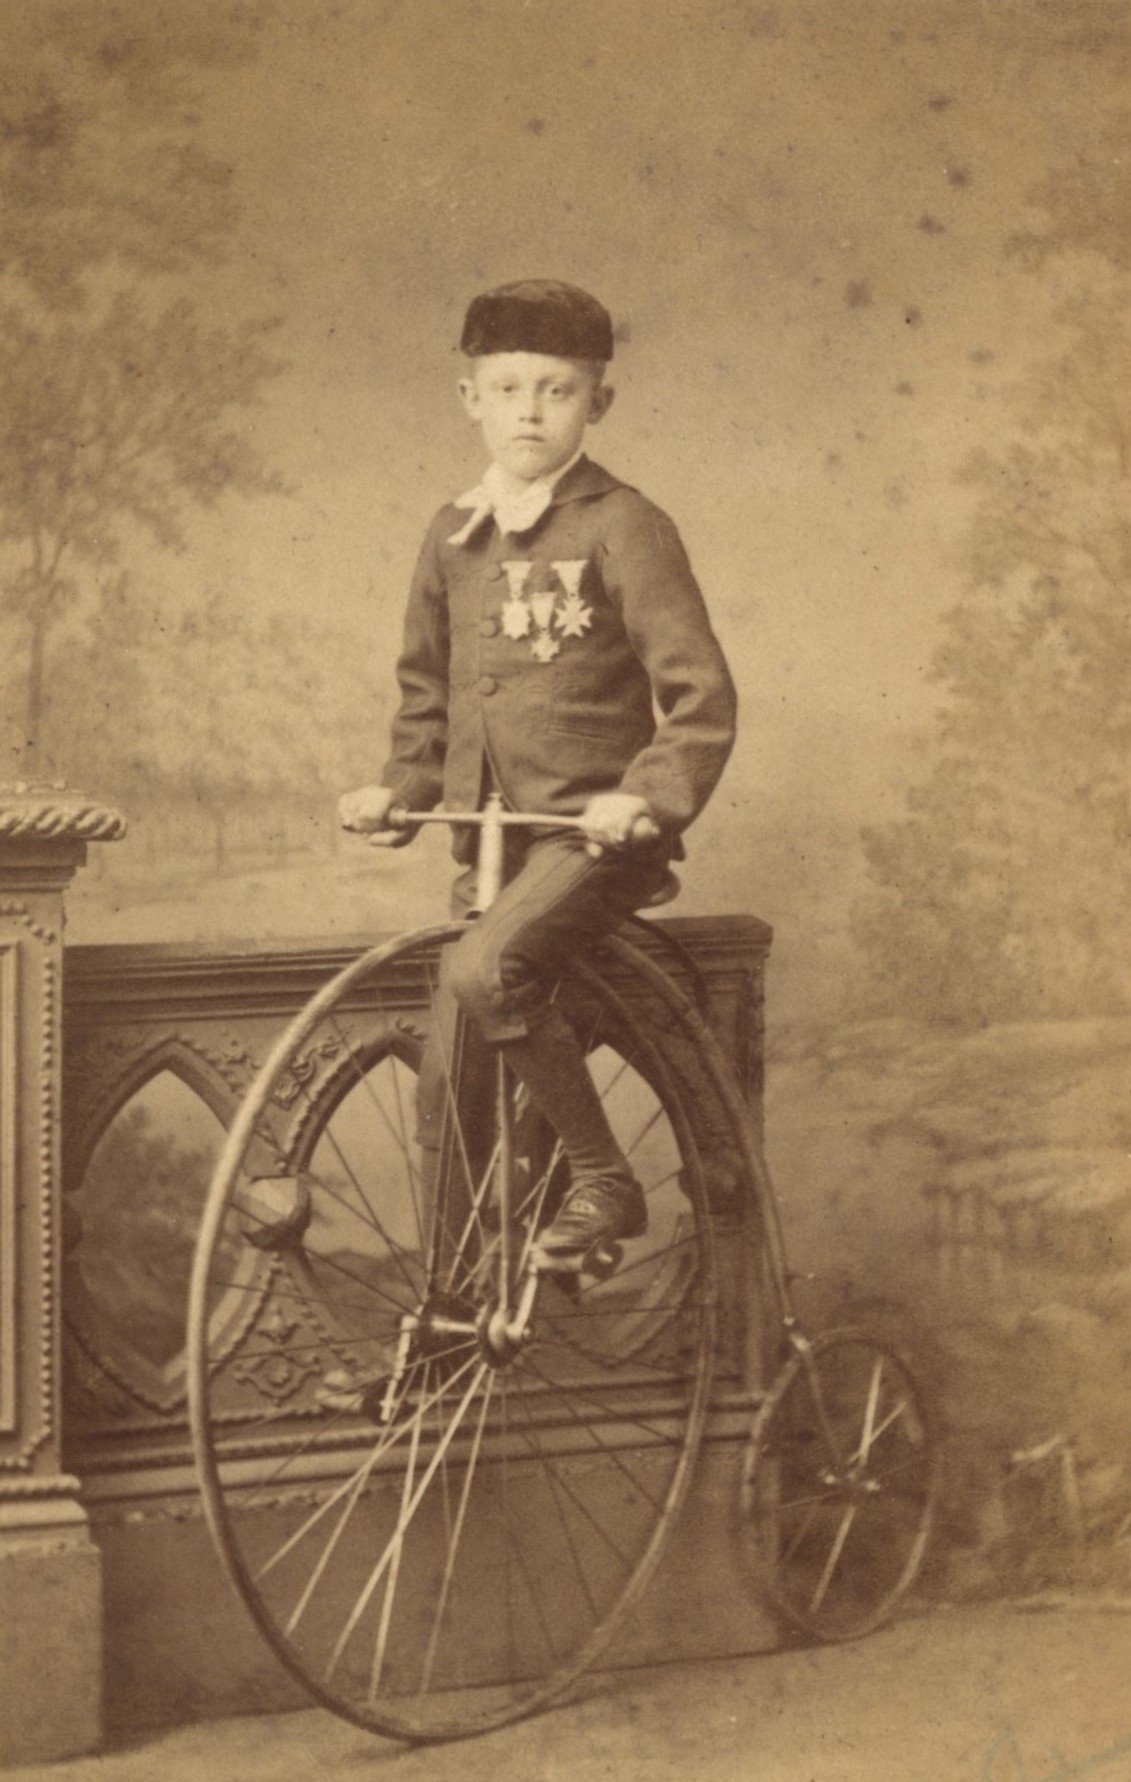 Child with ordinary bicycle and medals